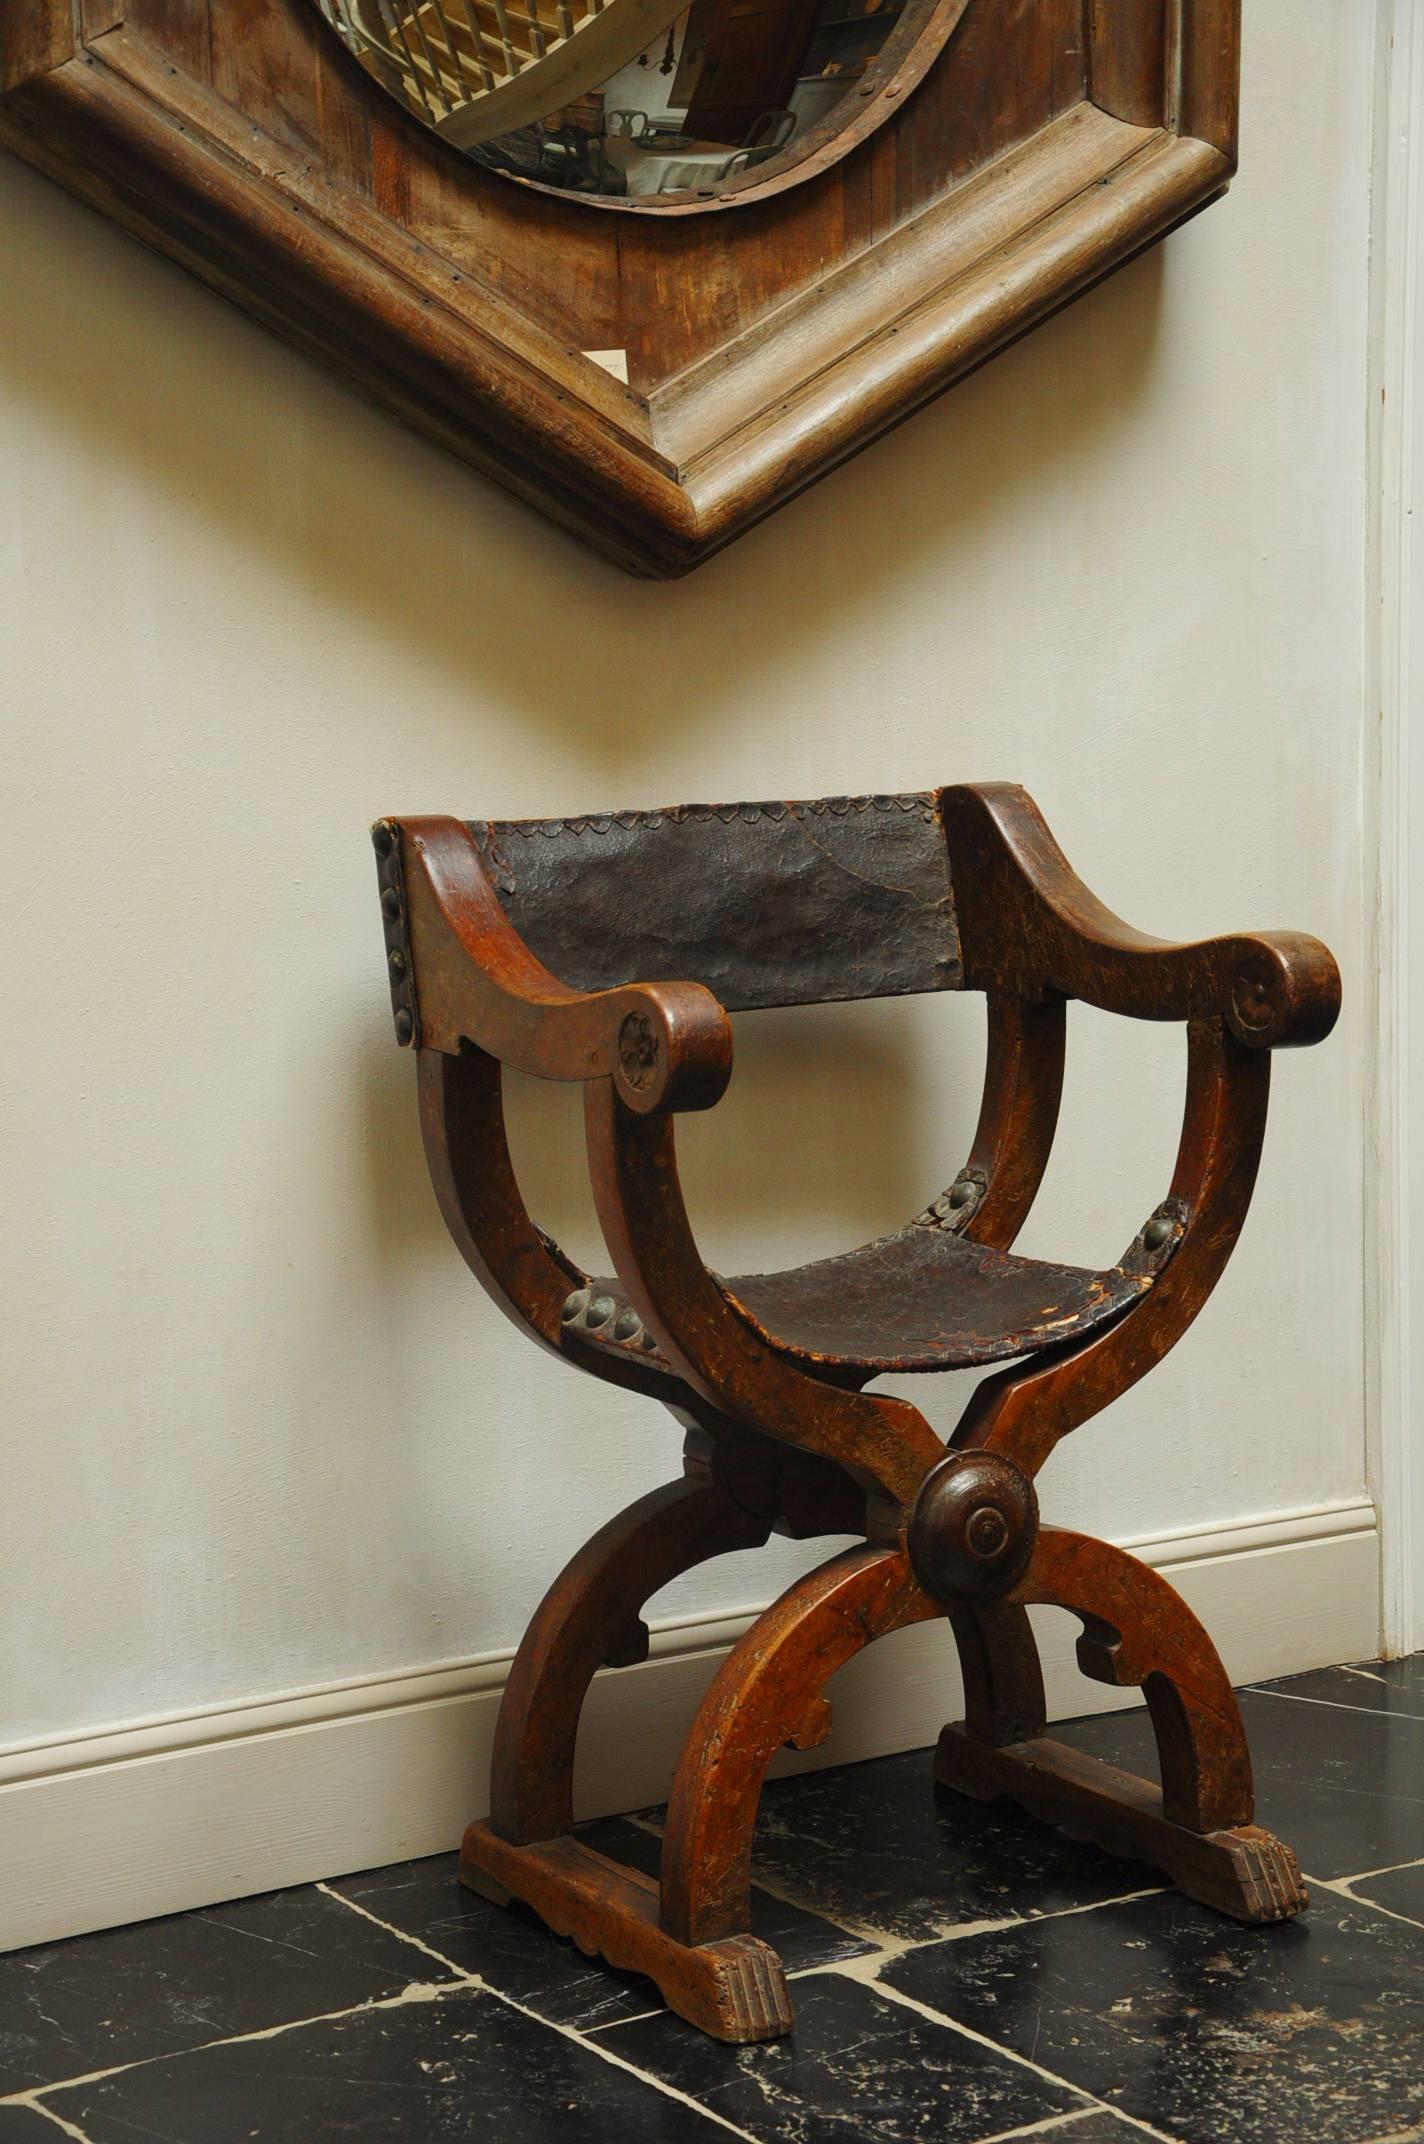 Curule chairs like this one are often called Dante or Savonorella chairs because they were often depicted in 16th century engravings. We now know that the origins of this chair type date back to the Egyptians and were popularized by the Romans as a